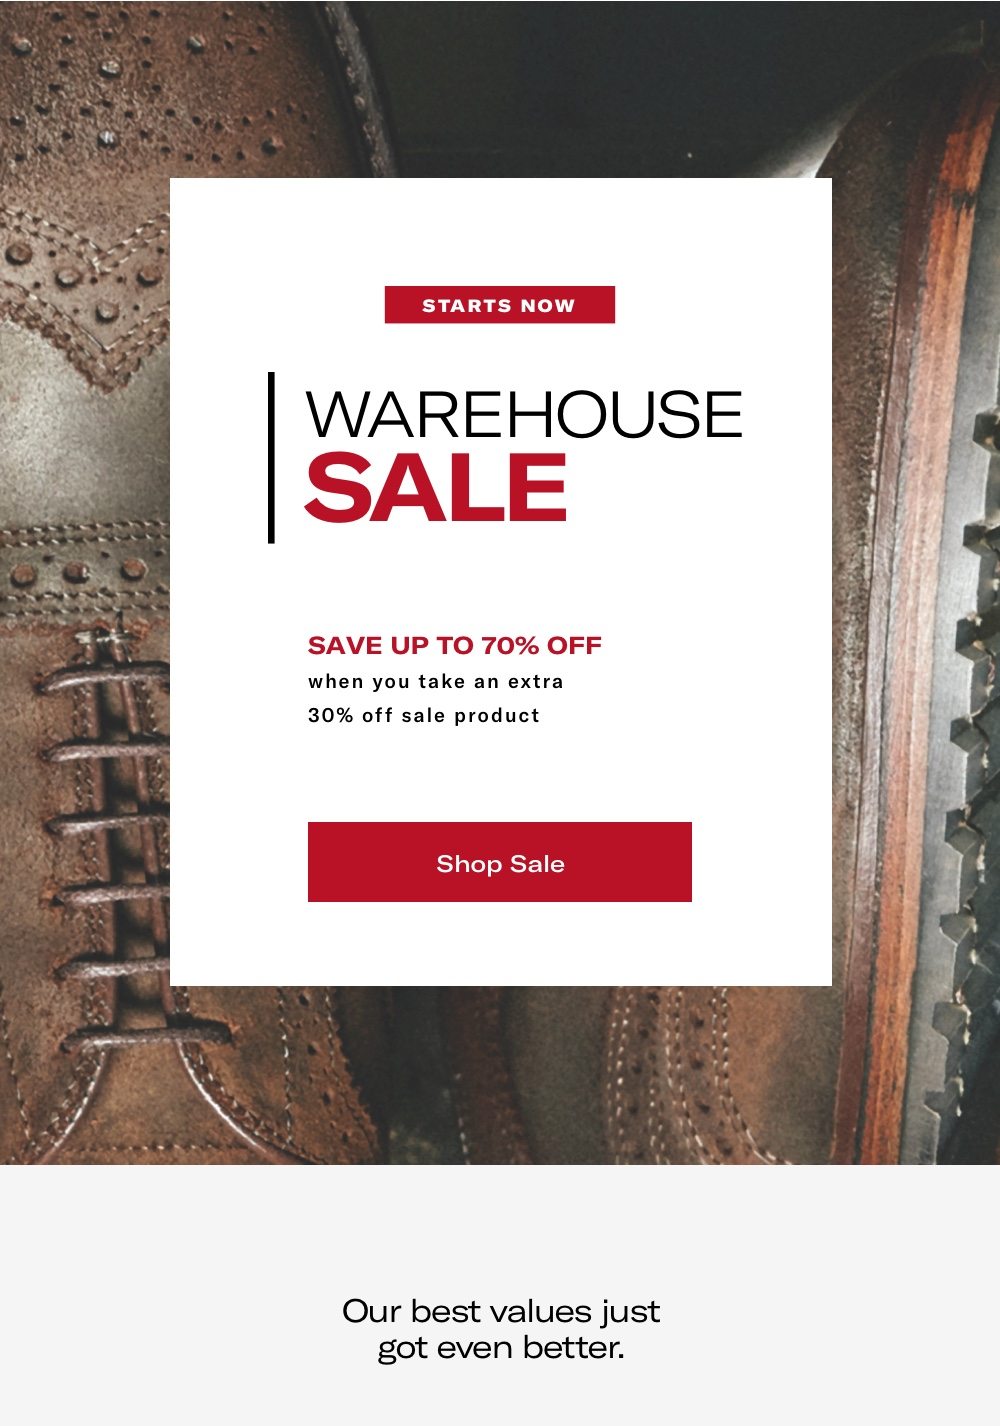 Shop the Warehouse Sale - Starts Today